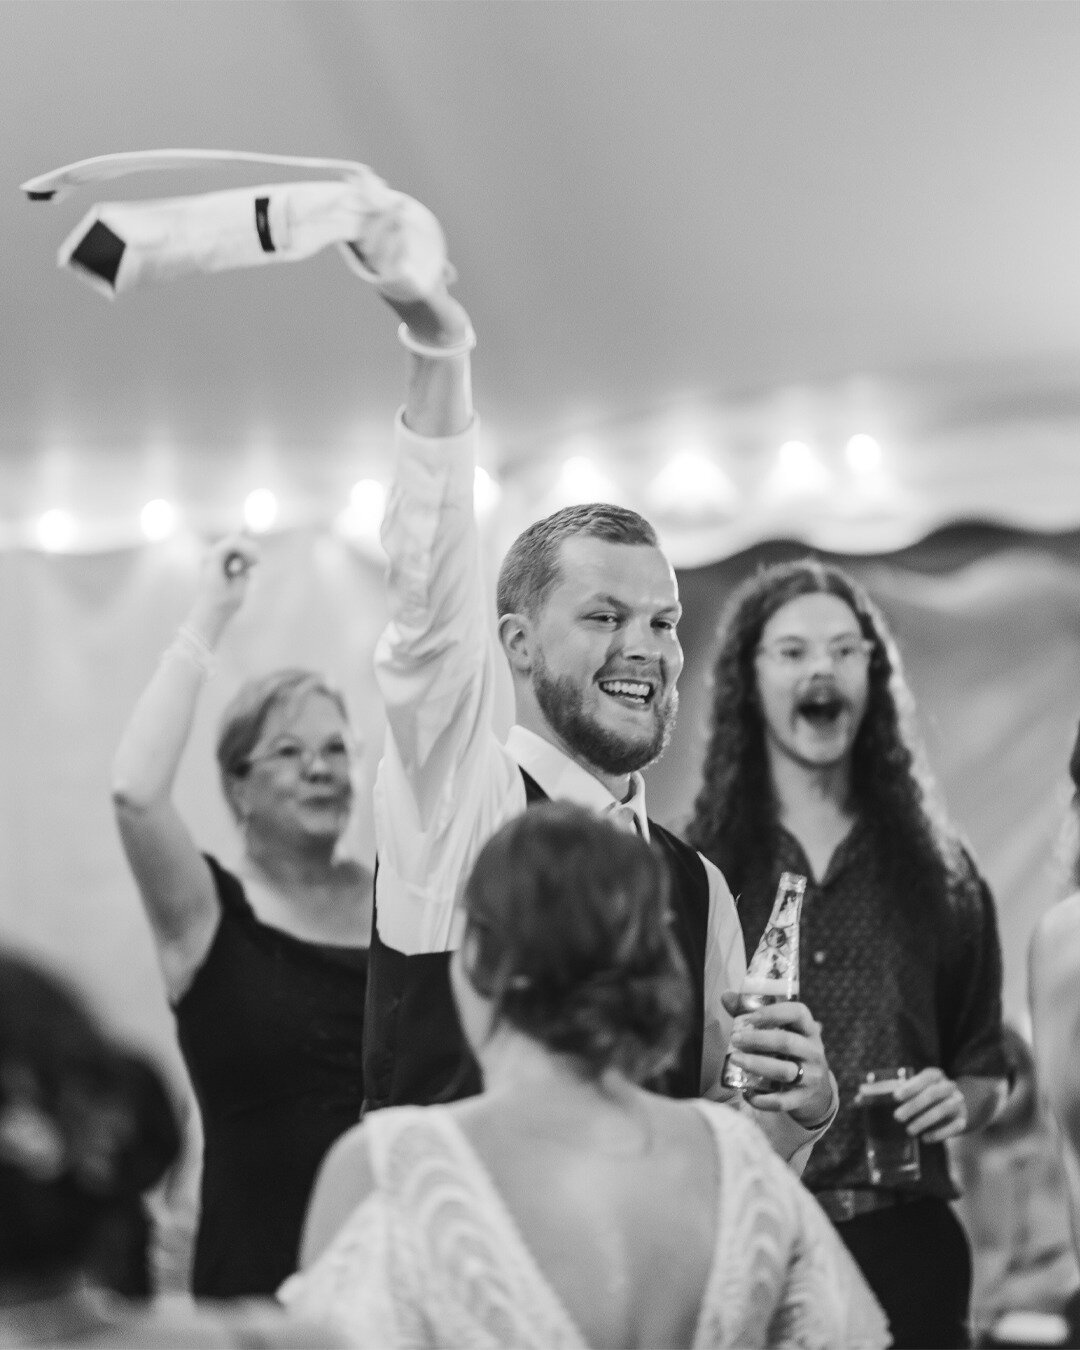 Count us in for all the tie swinging good times on your wedding day! 💃🎉

#BMSVisuals #blkmktri #photographer #weddingphotographer #weddingvideographer #rhodeislandphotographer #portraitphotographer #engagementphotographer #eventphotographer #eventv